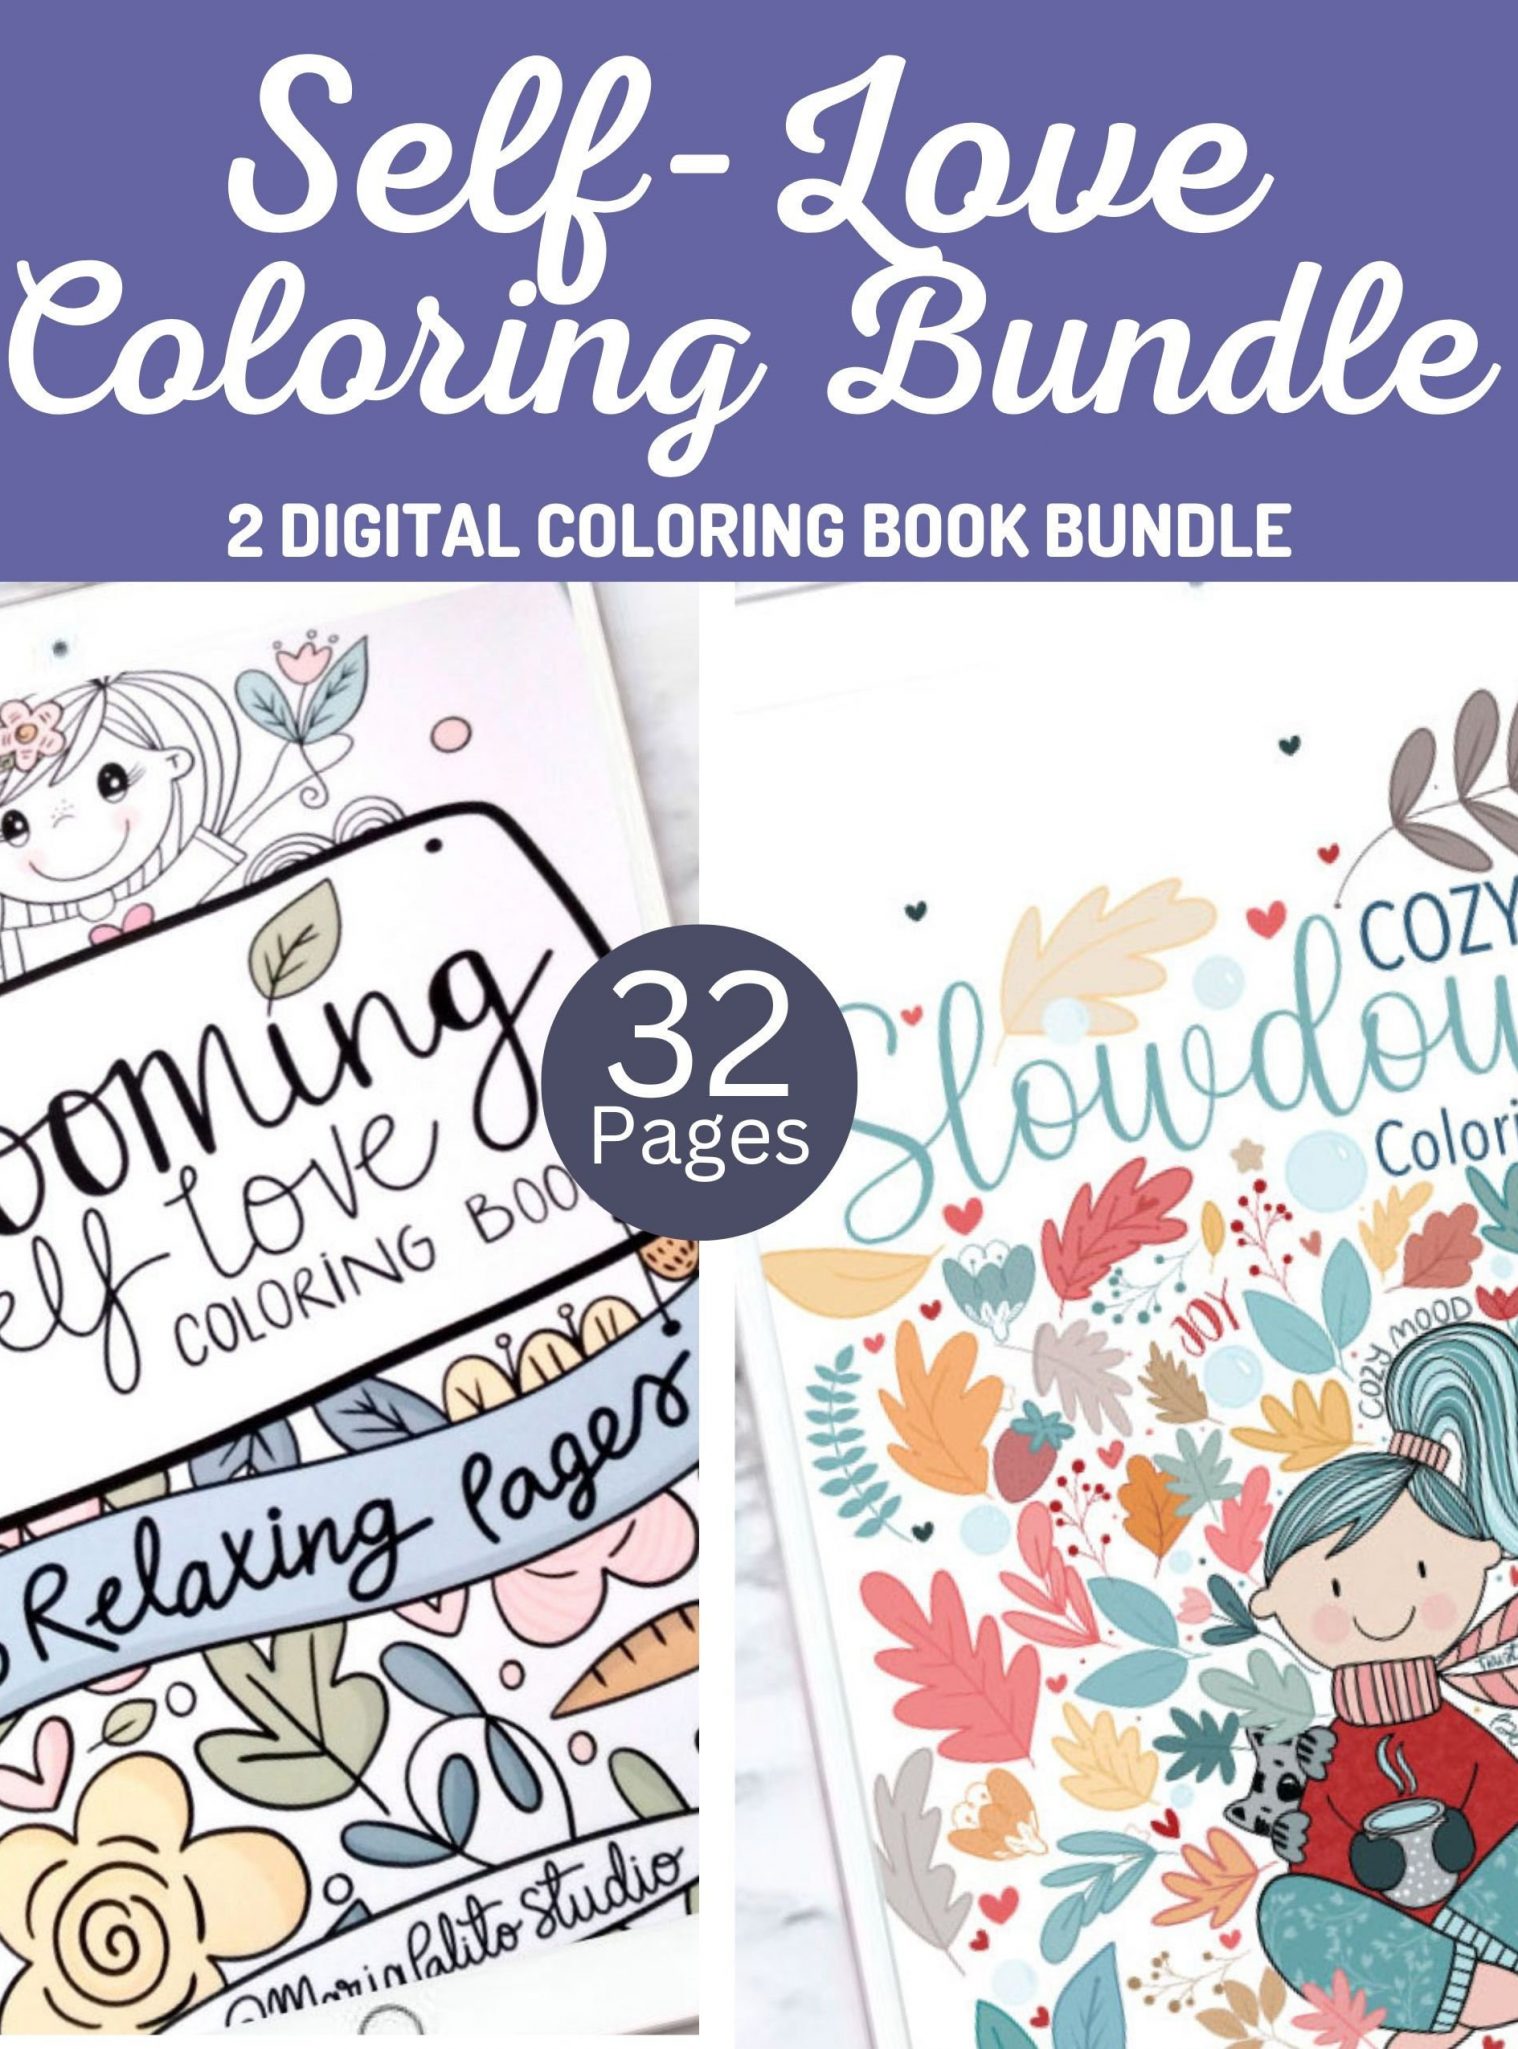 32 Girly Digital Coloring Book Bundle | Self-Love + Cozy Gir Cute Coloring Pages + 2 Procreate Color Palettes | M062